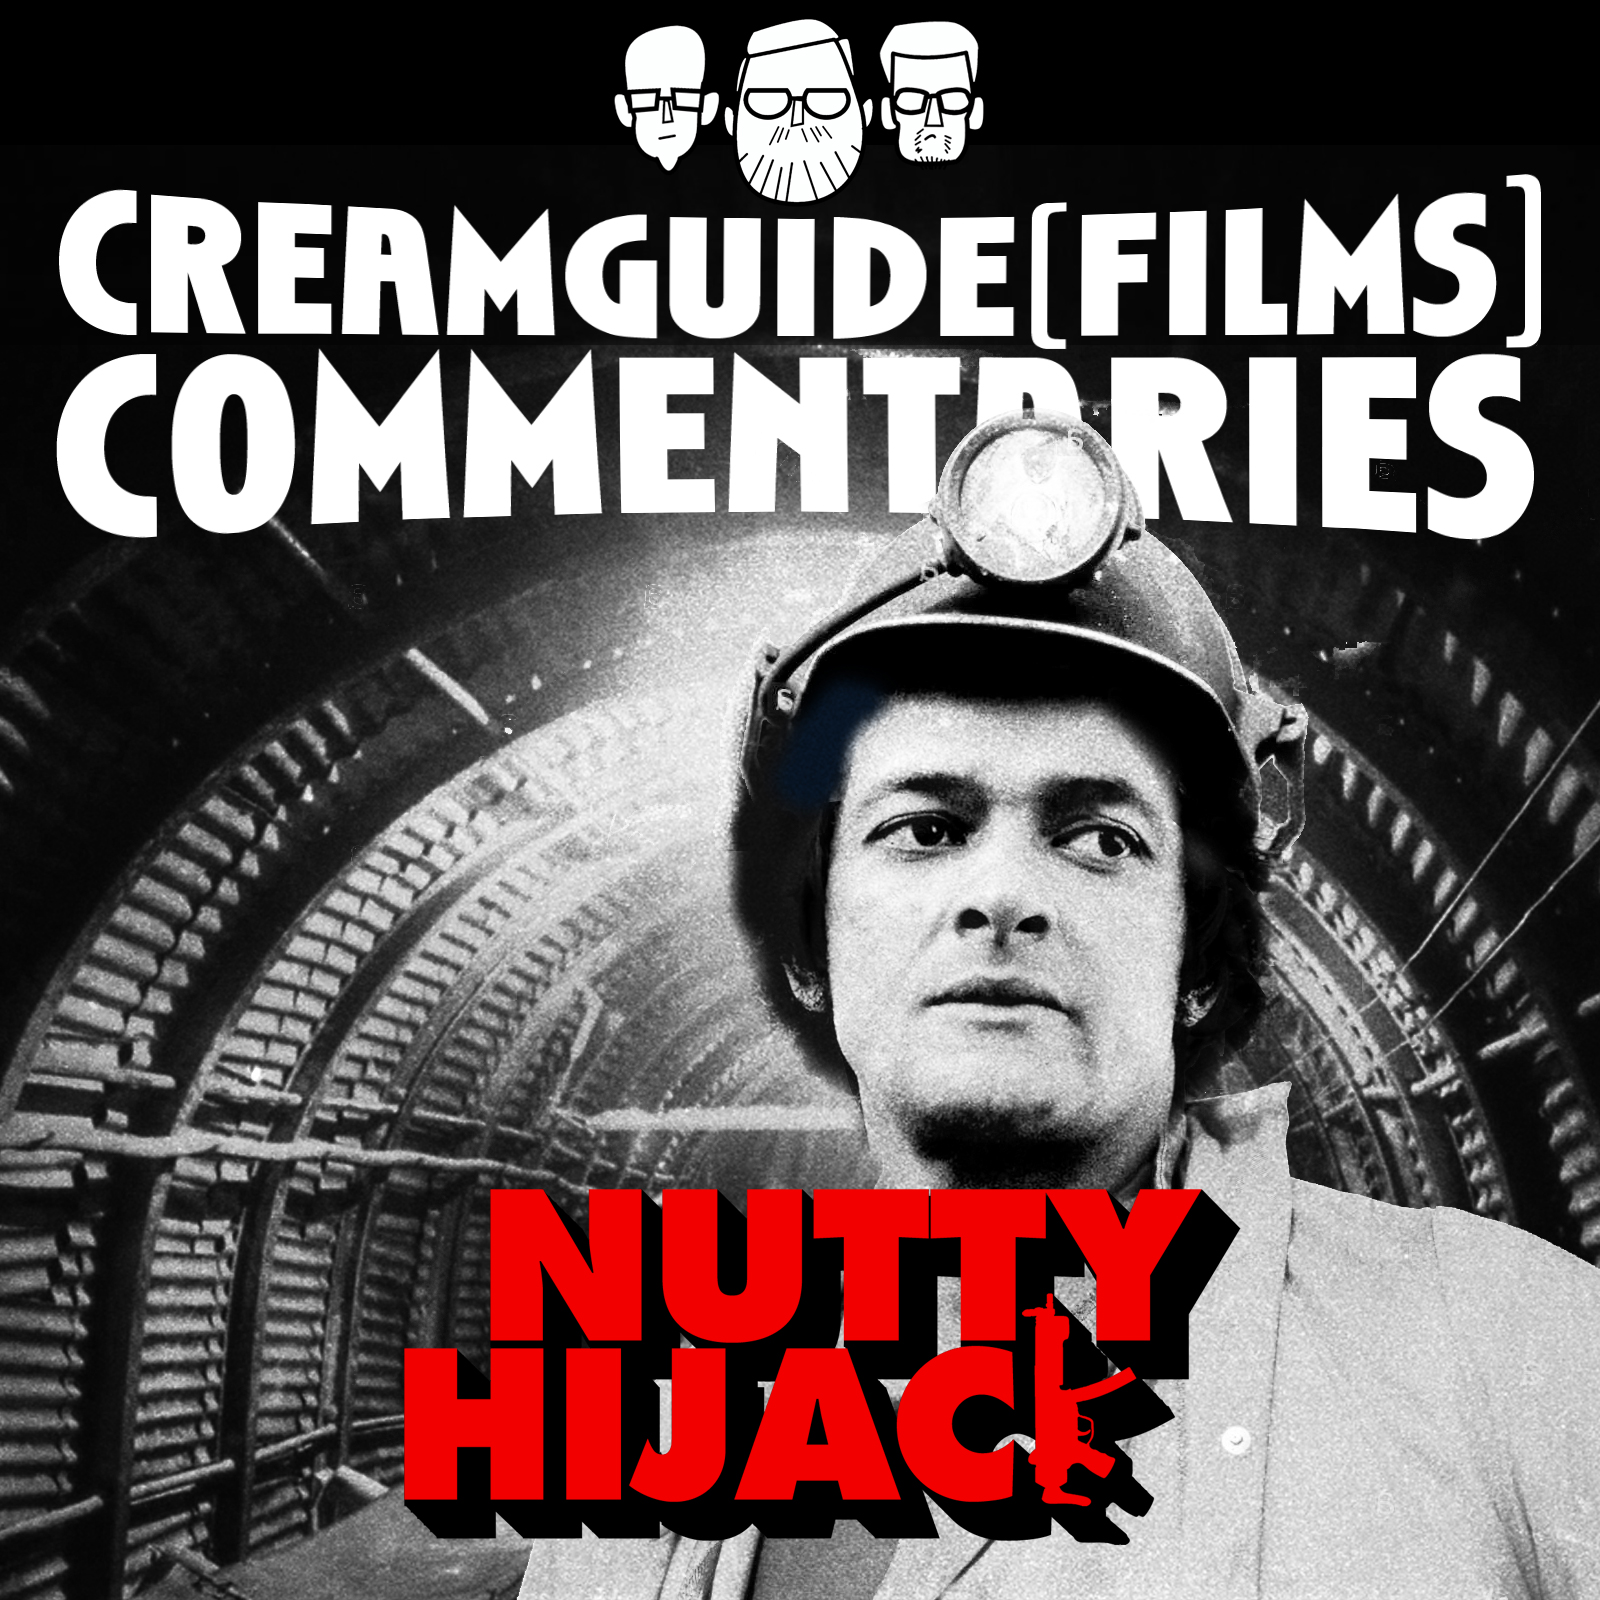 Creamguide (Films) Commentaries: Nutty Hijack